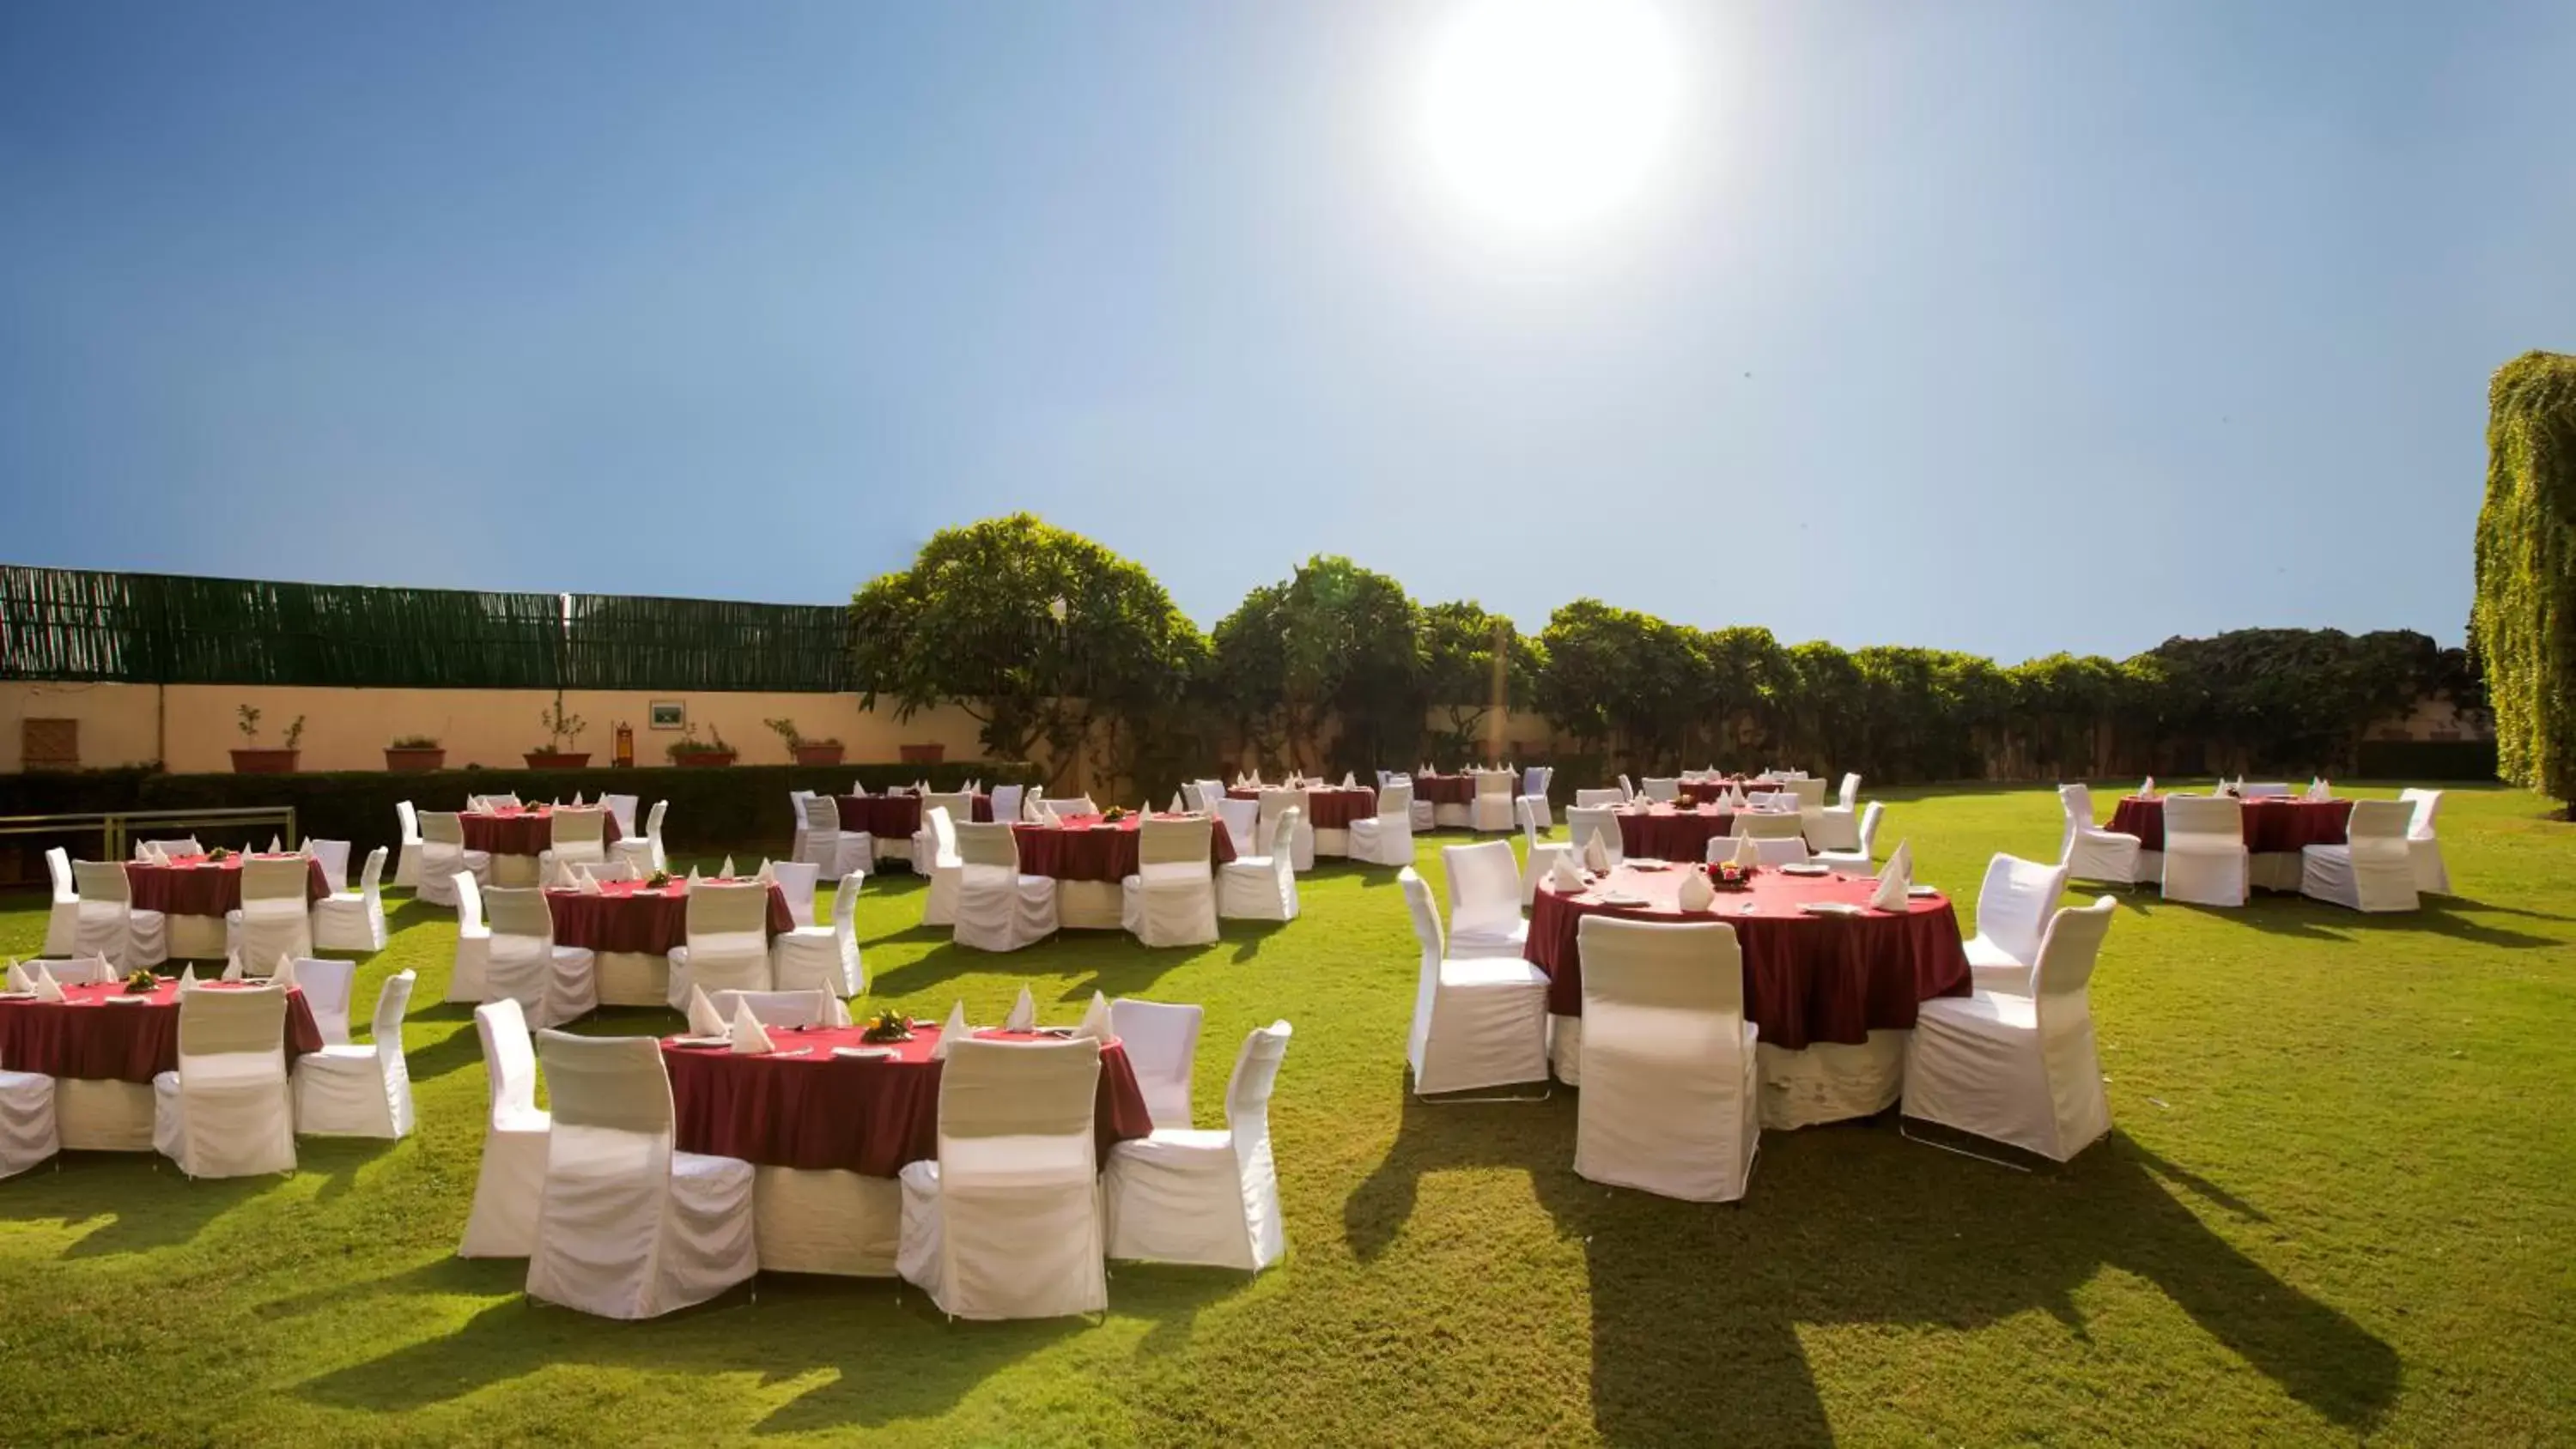 Banquet/Function facilities, Banquet Facilities in Hotel Royal Orchid Jaipur, 3 Kms to Airport